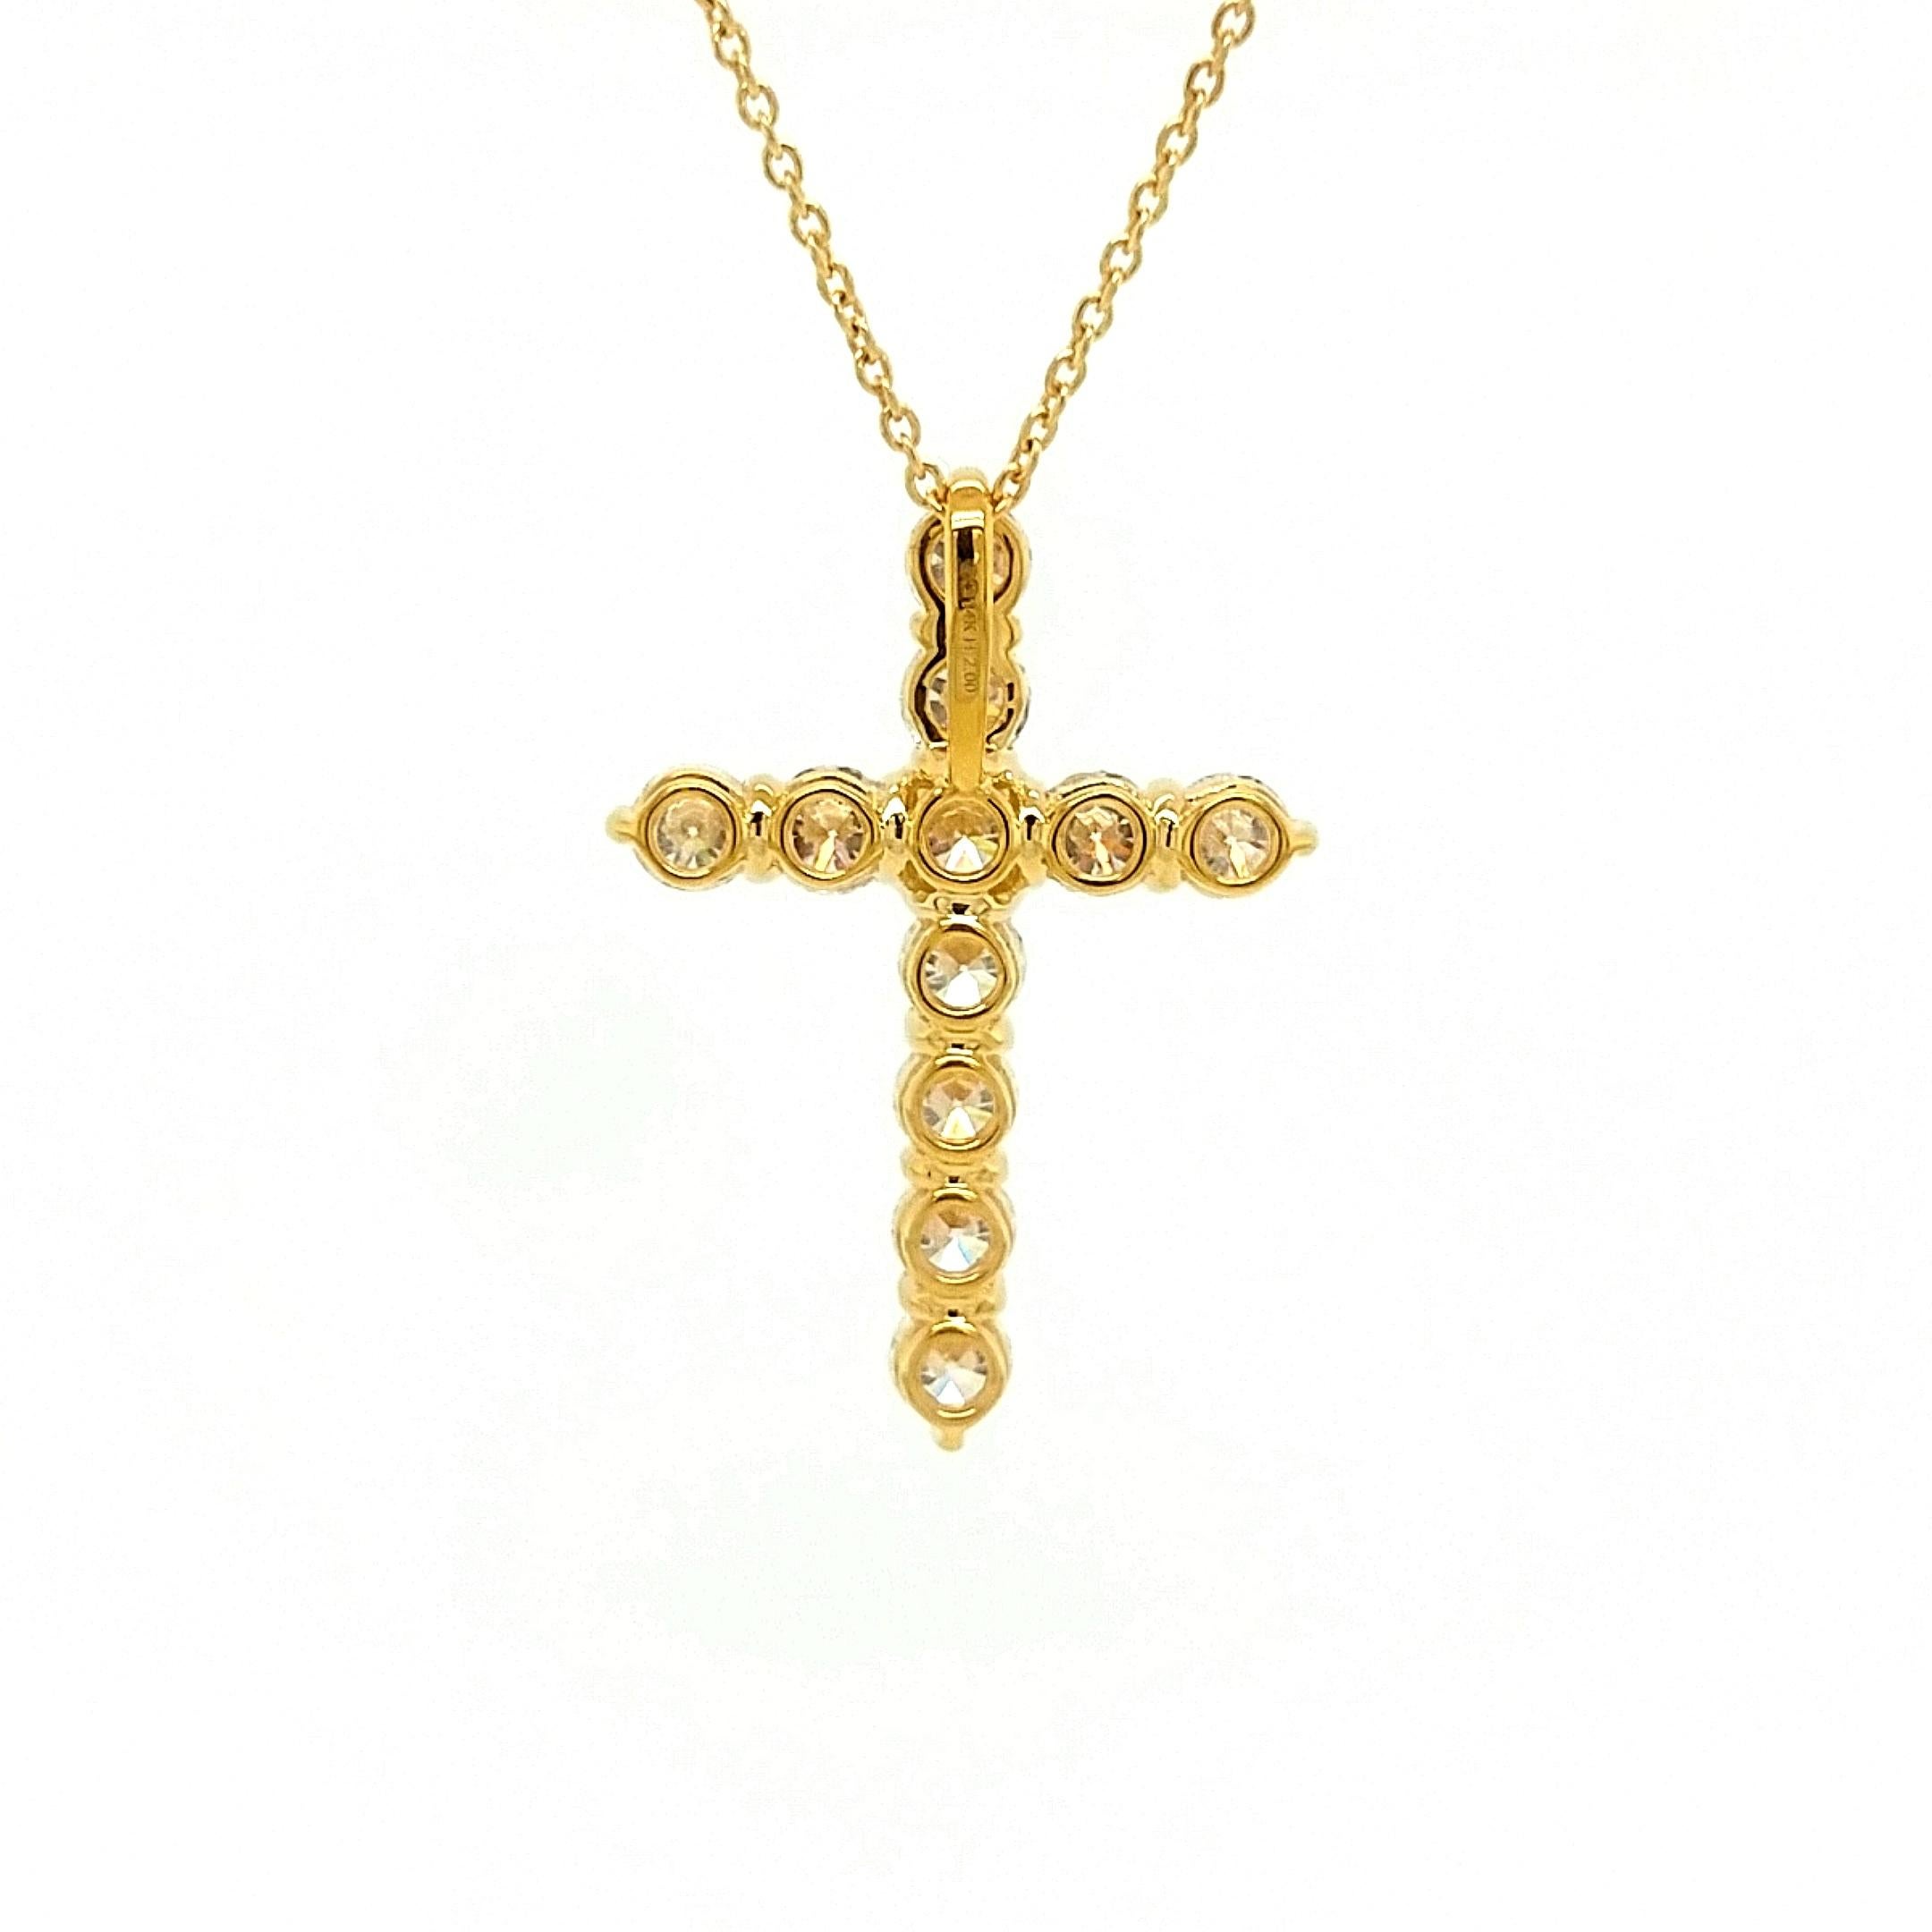 A beautiful yellow gold, diamond cross pendant necklace. A classic cross pendant set with 11 round brilliant cut diamonds All the stones are prong set. The total diamond weight is 2.00 carat. The diamonds are H-I color and SI1/SI2 clarity. The